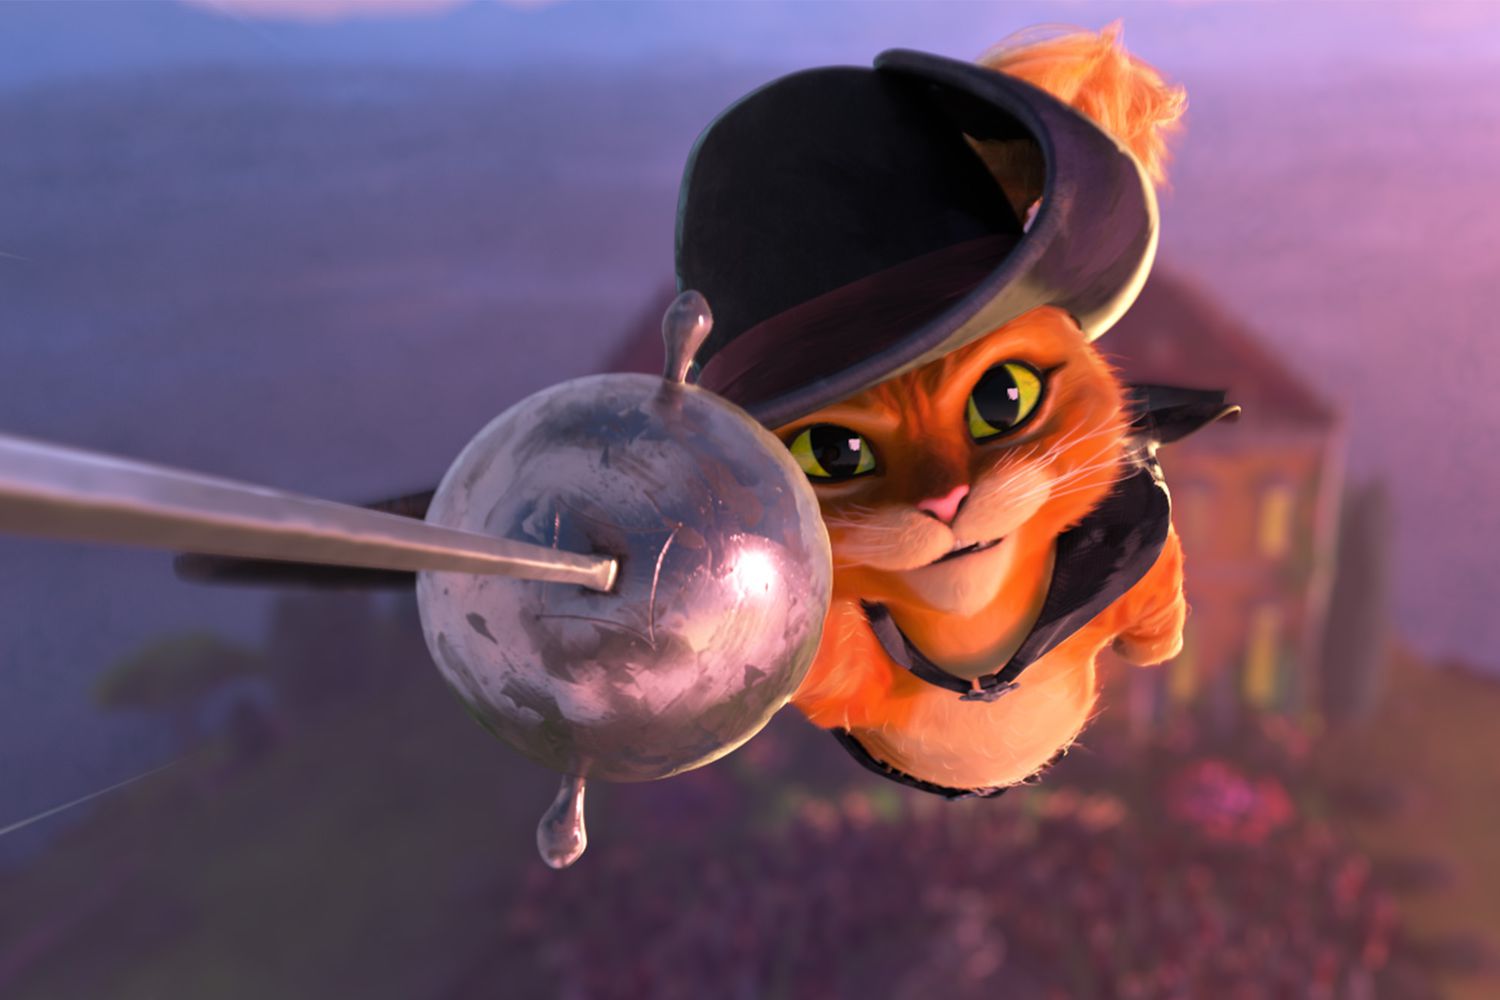 Puss in Boots (Antonio Banderas) in DreamWorks Animation’s Puss in Boots: The Last Wish, directed by Joel Crawford.